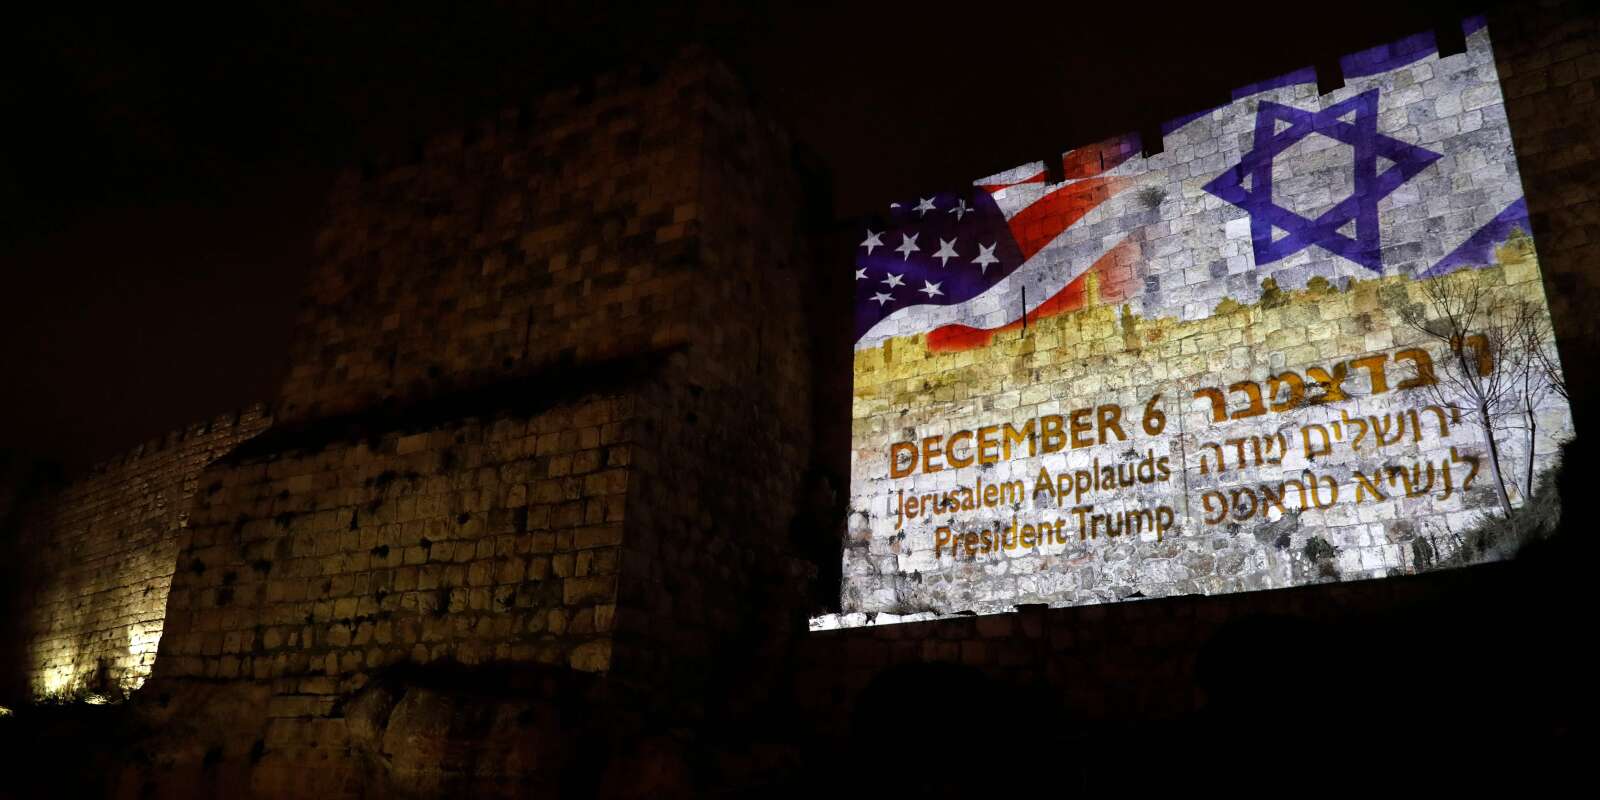 A picture taken on December 6, 2017 shows a giant US flag screened alongside Israel's national flag by the Jerusalem municipality on the walls of the old city. US President Donald Trump recognized the disputed city of Jerusalem as Israel's capital on December 6, 2017, and kicked off the process of relocating the US embassy there from Tel Aviv. The old city lies in the eastern part of Jerusalem which was under Jordanian control from Israel's creation in 1948 until Israeli forces captured it during the 1967 Six-Day War, and Israel later annexed it in a move not recognised by the international community. / AFP / Ahmad GHARABLI